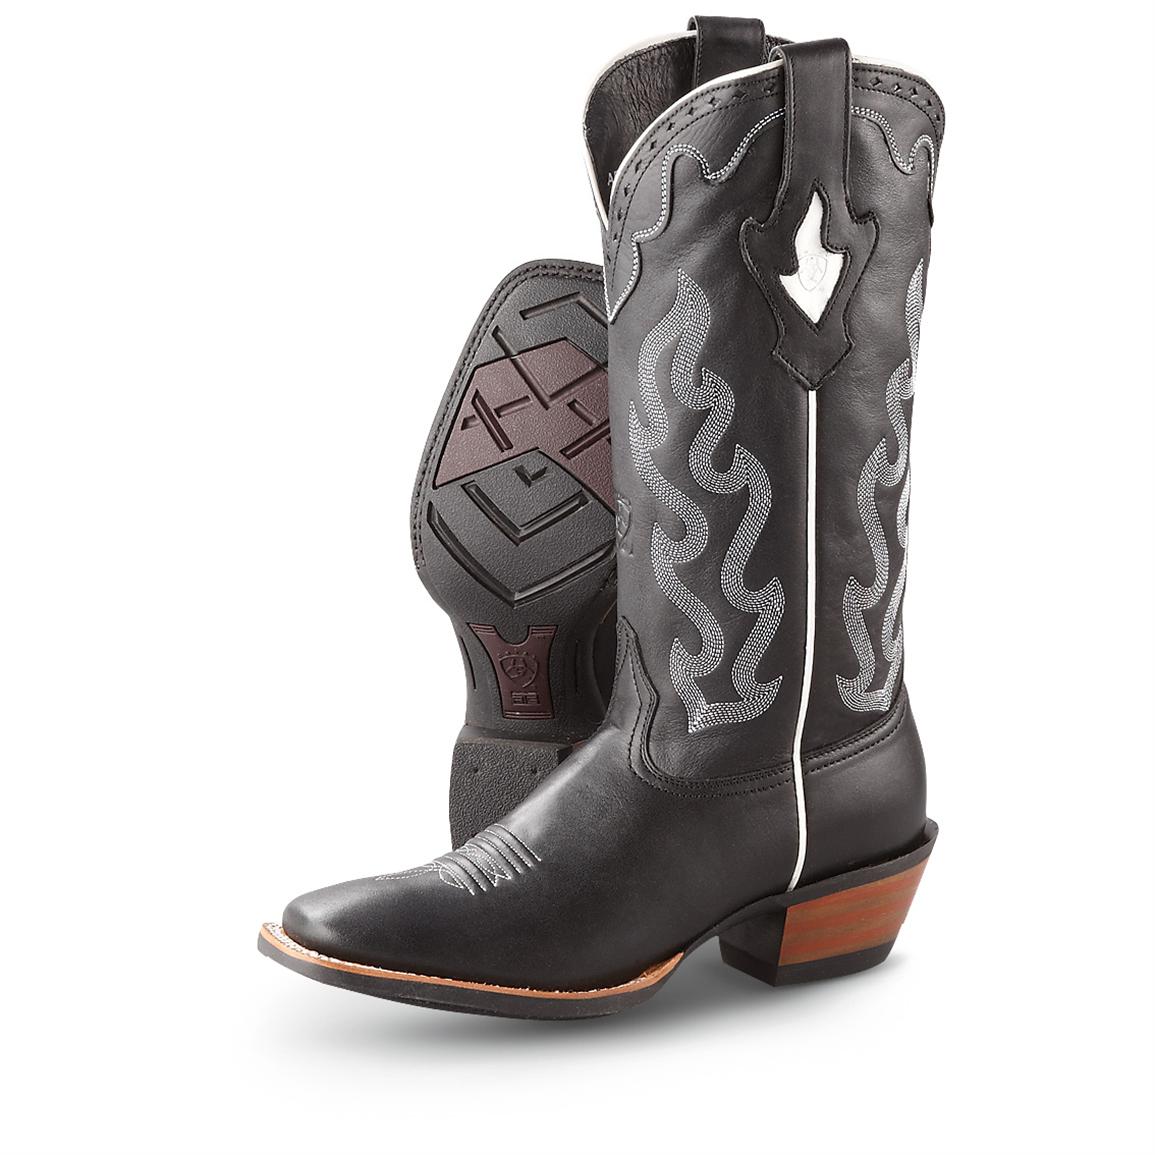 List 100+ Pictures Images Of Cowgirl Boots Latest